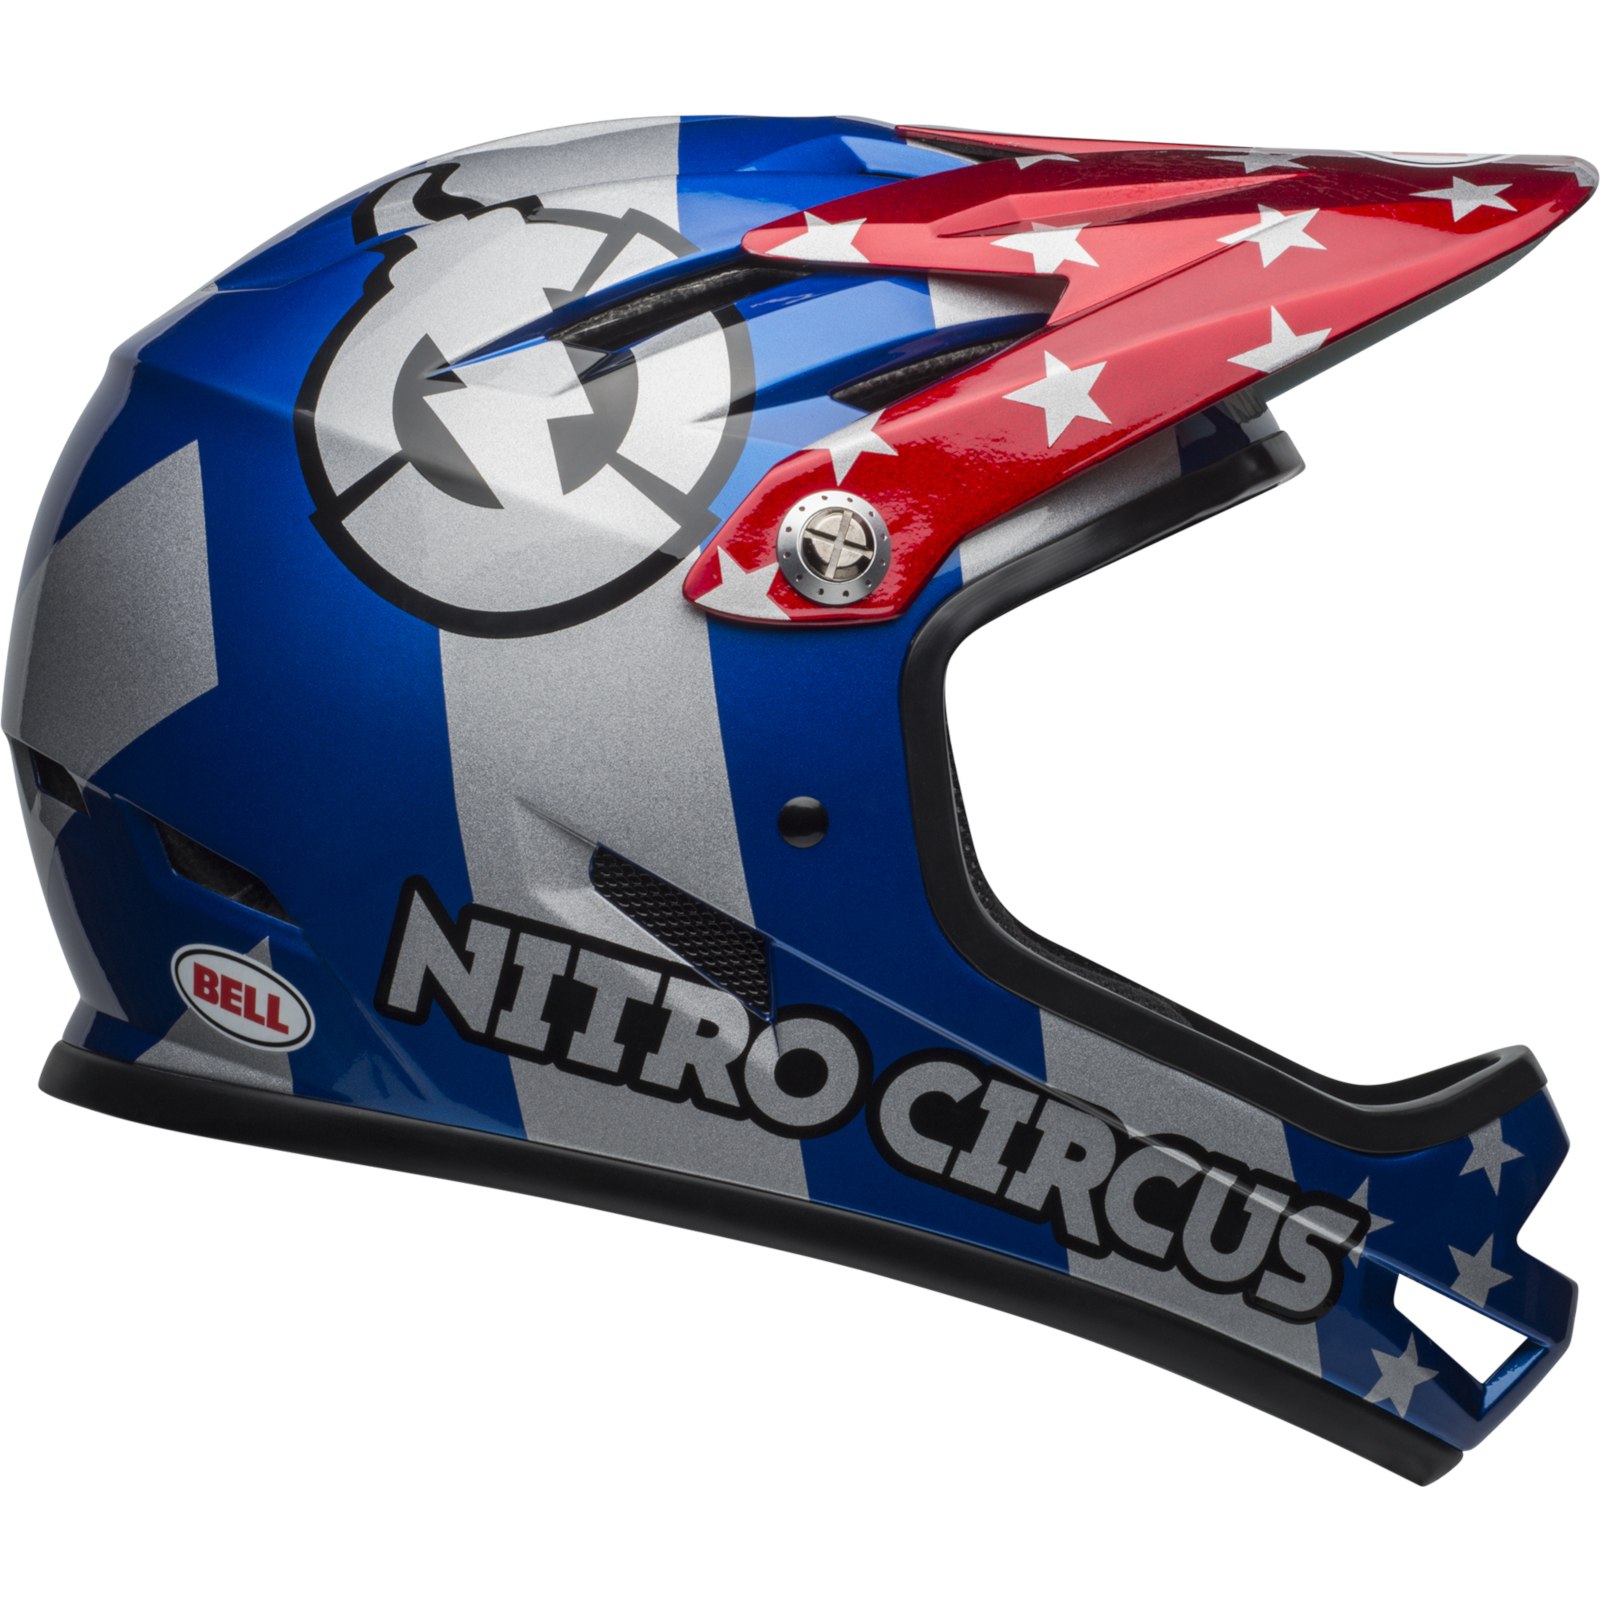 Picture of Bell Sanction Helmet - red/silver/blue Nitro Circus